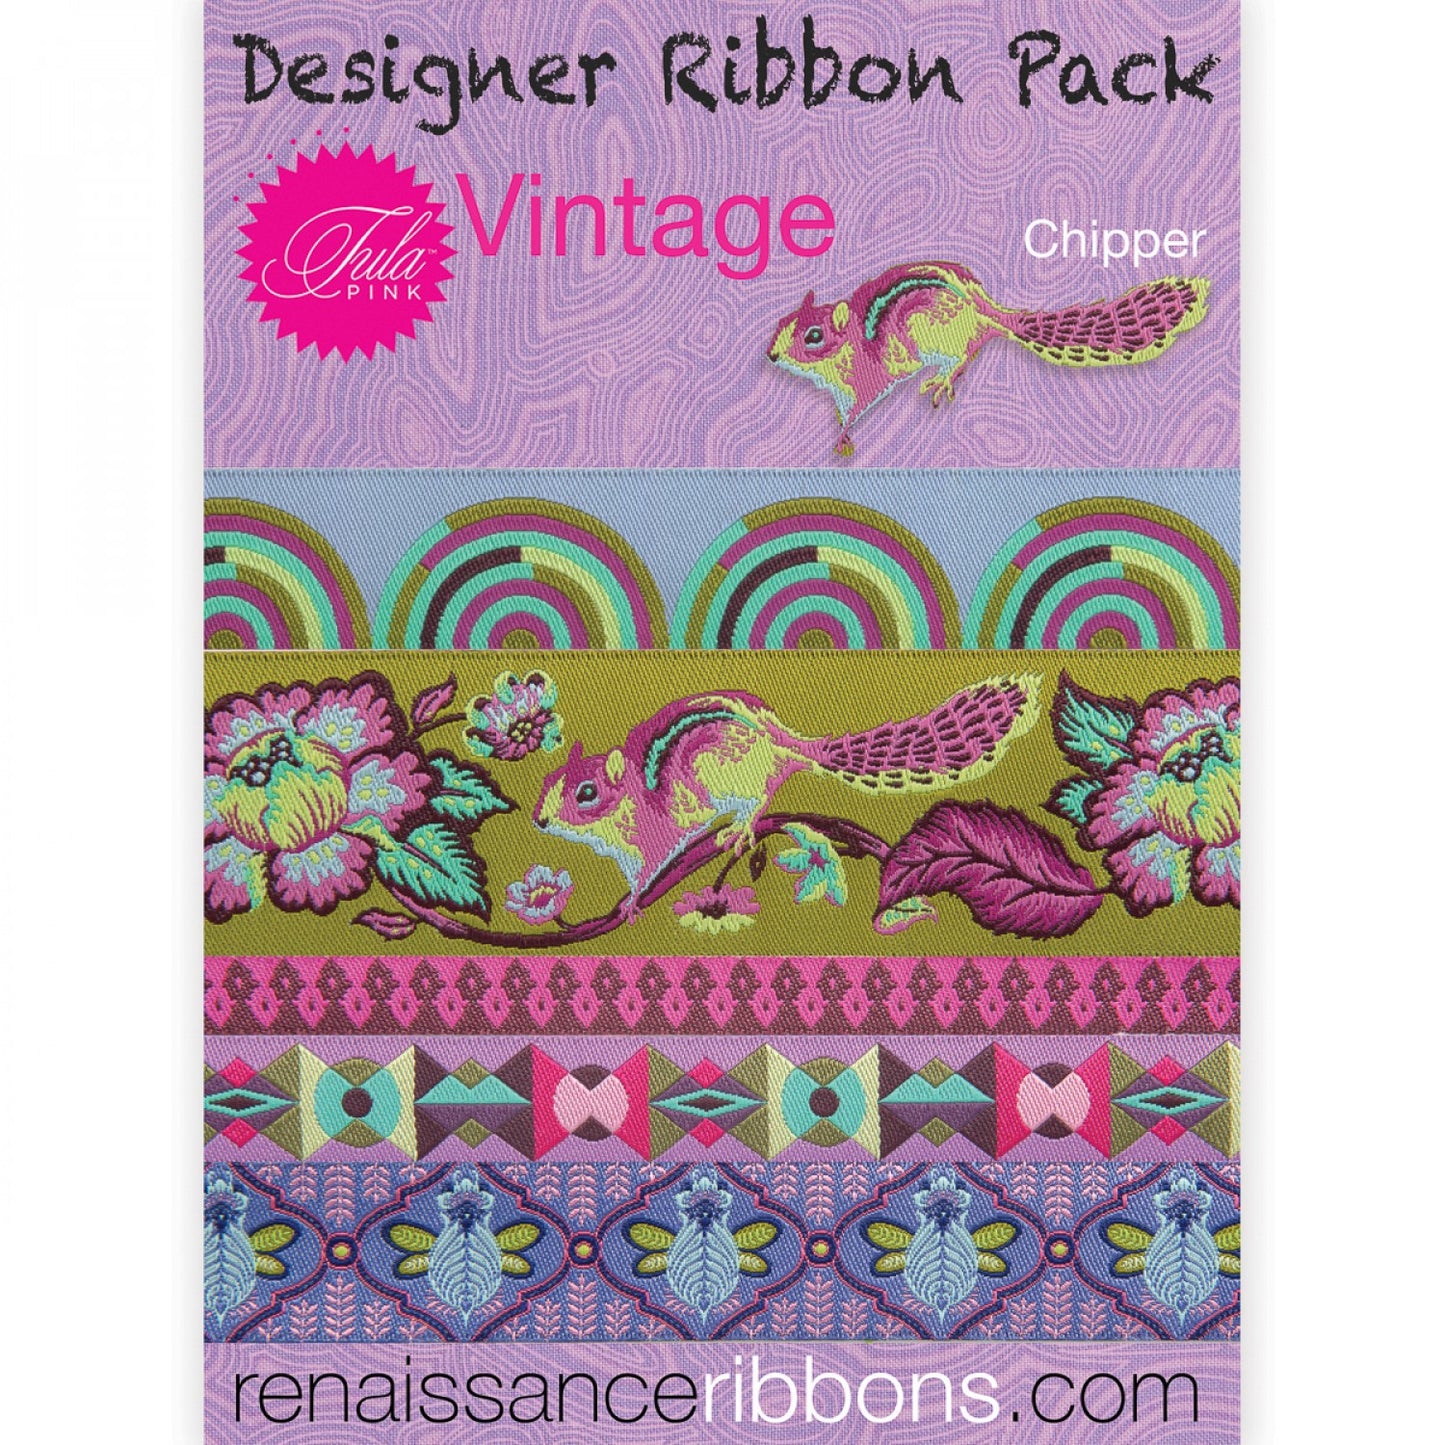 This is a limited edition of the best jacquard woven ribbons designed by Tula Pink for Renaissance Ribbons over the last 10 years, it includes designs from the discontinued collections of Spirit Animal, Moonshine, Chipper, Slow and Steady and Prince Charming in the original color ways.